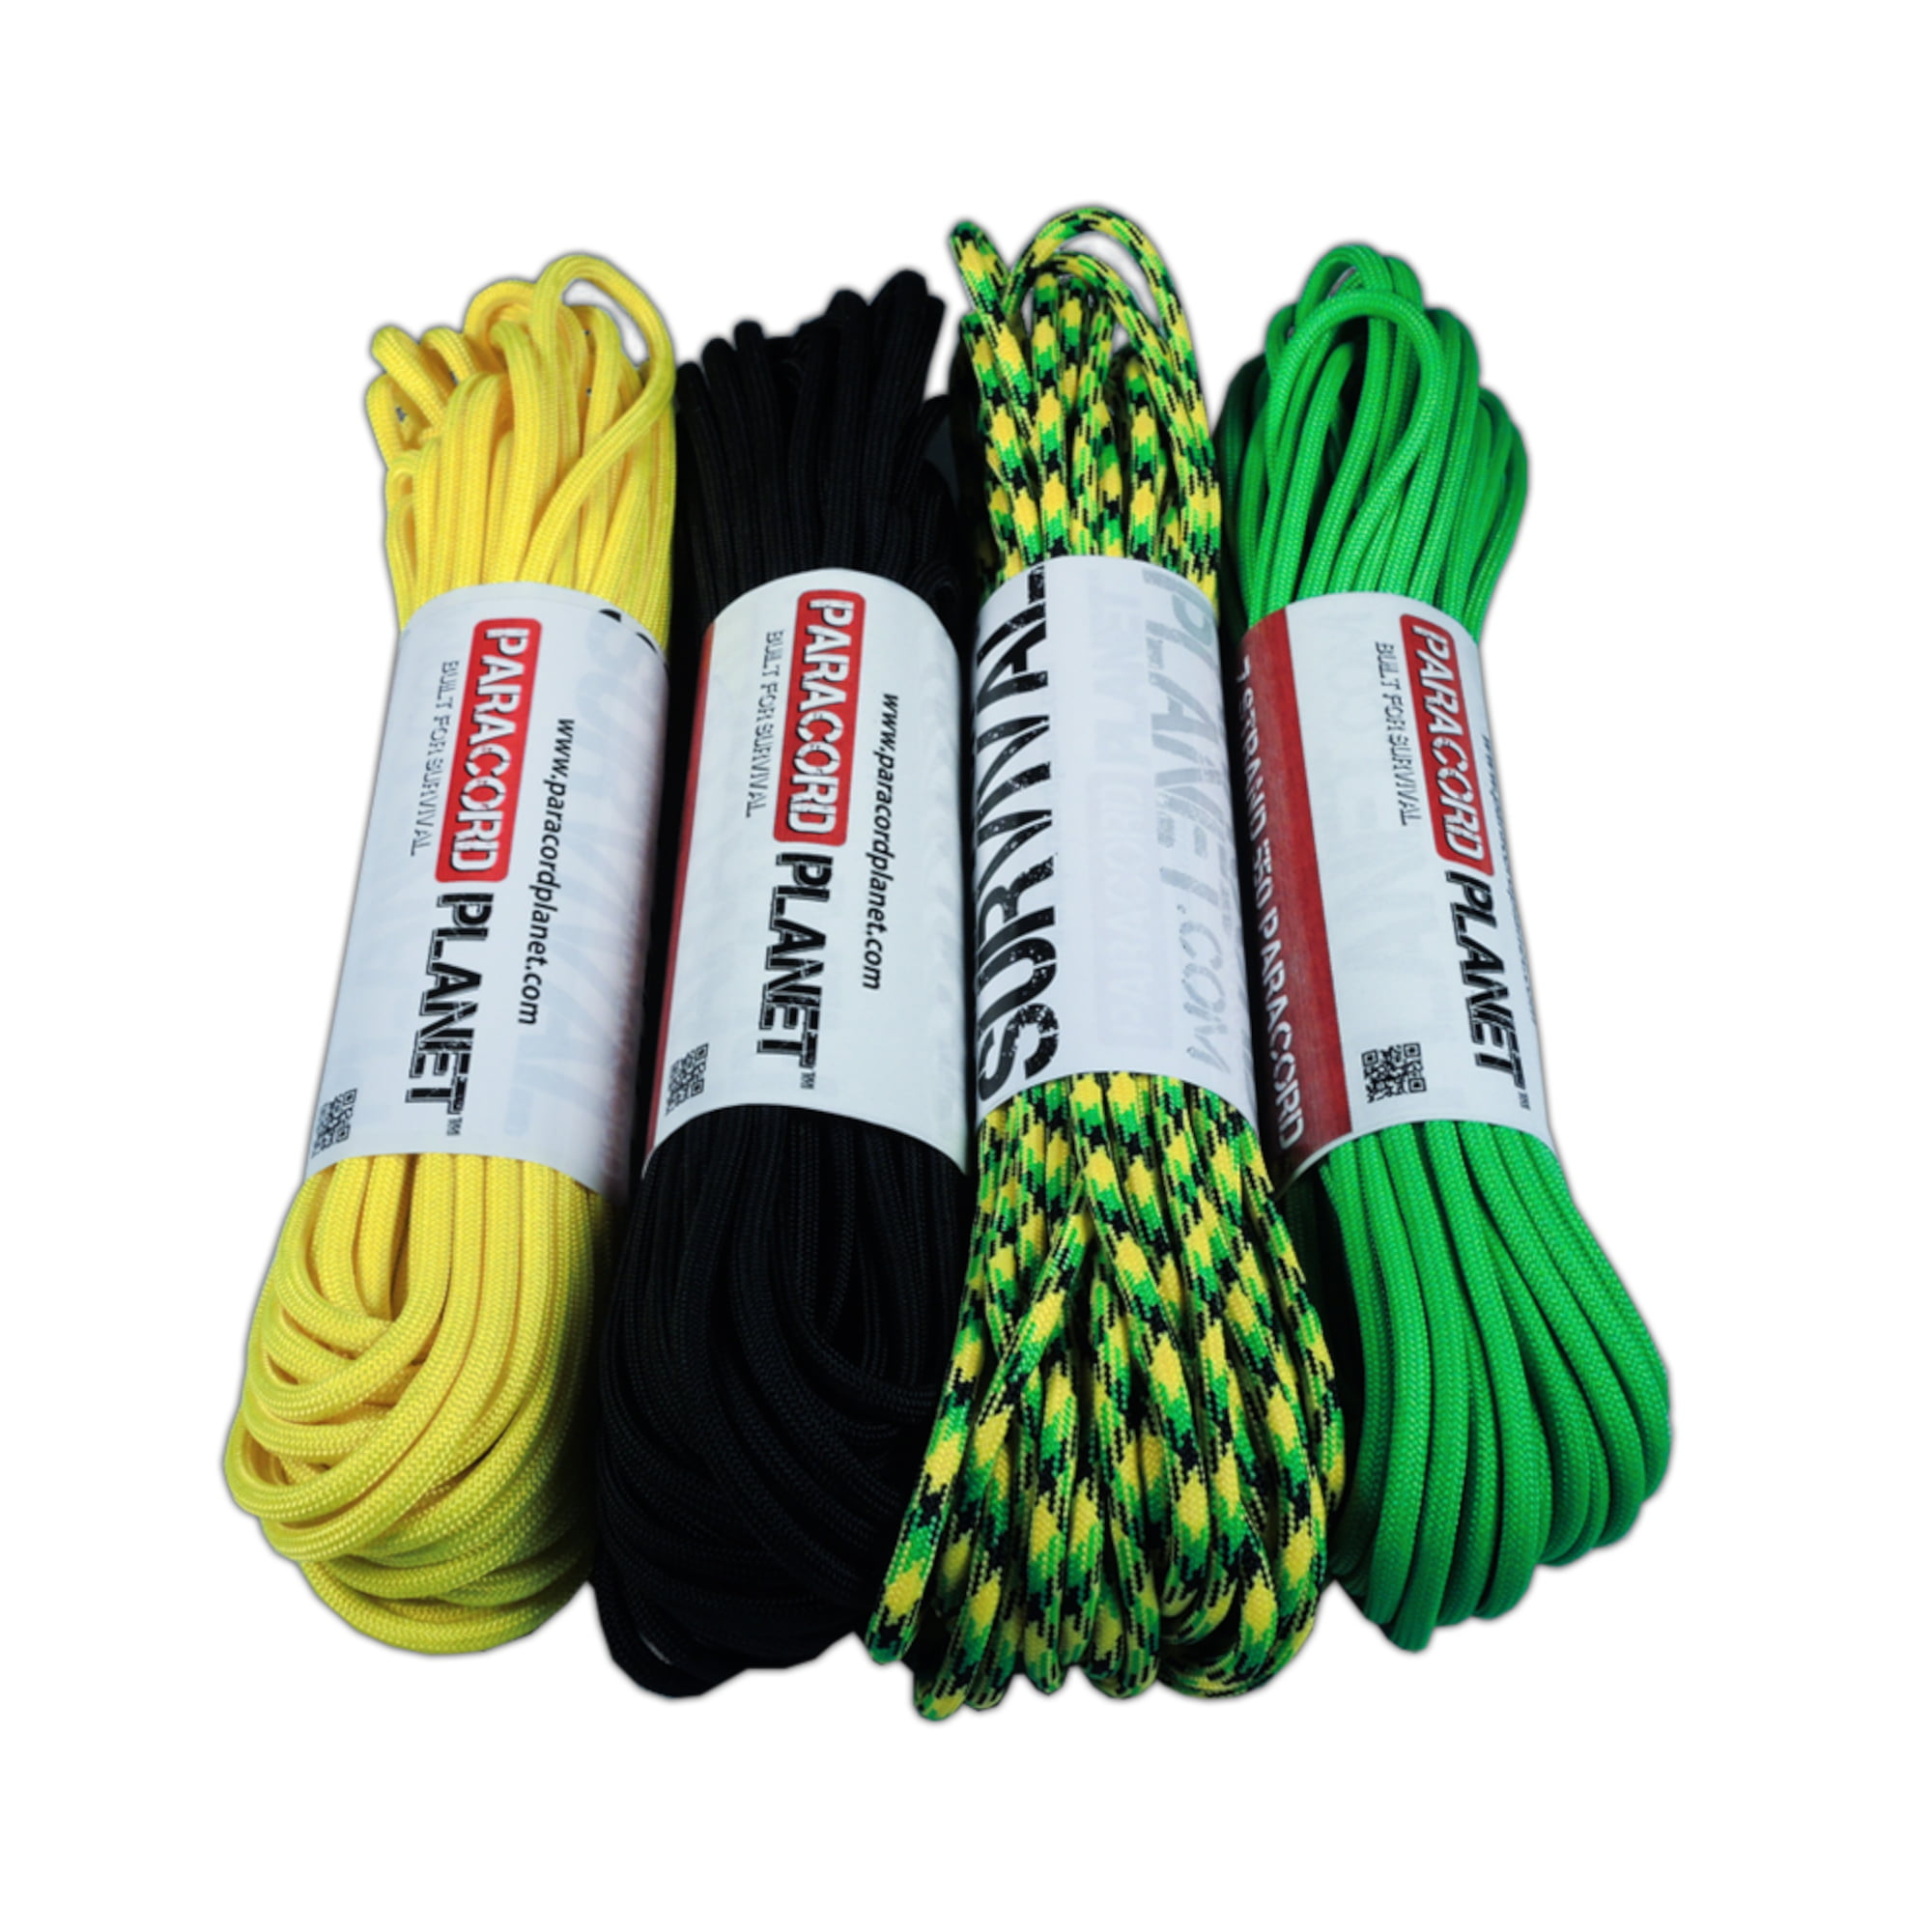 Party Paracord Planet 550 Cord Type III 7 Strand Paracord 100 Foot Hank